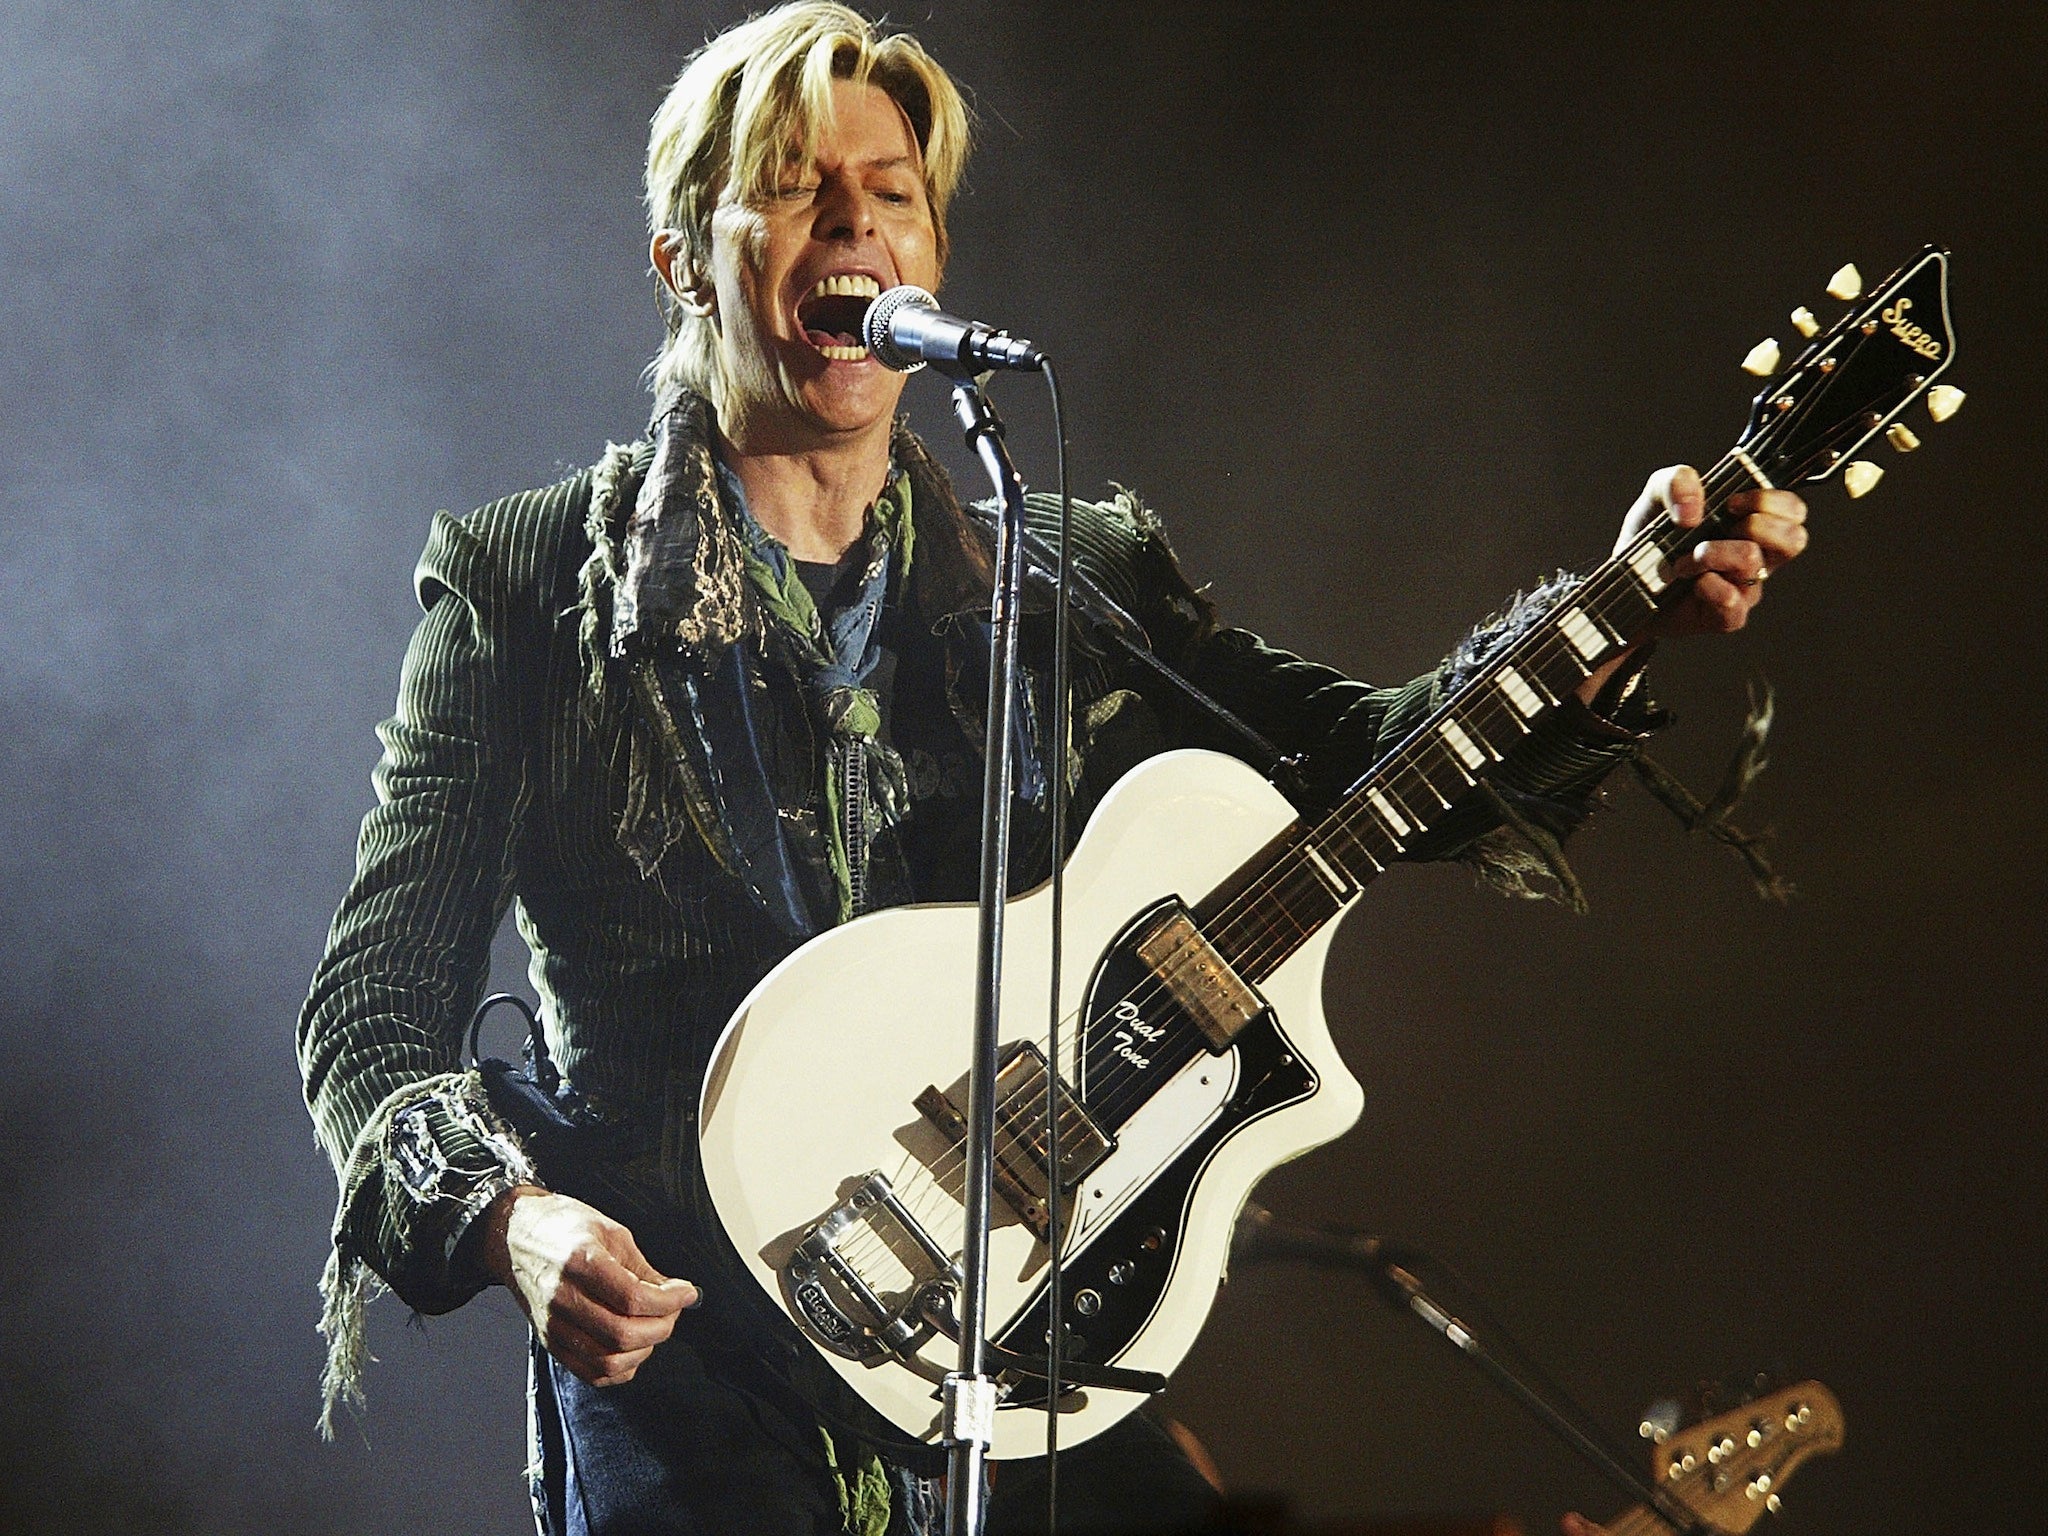 David Bowie won Best Male Solo Artist at the Brit Awards 2014